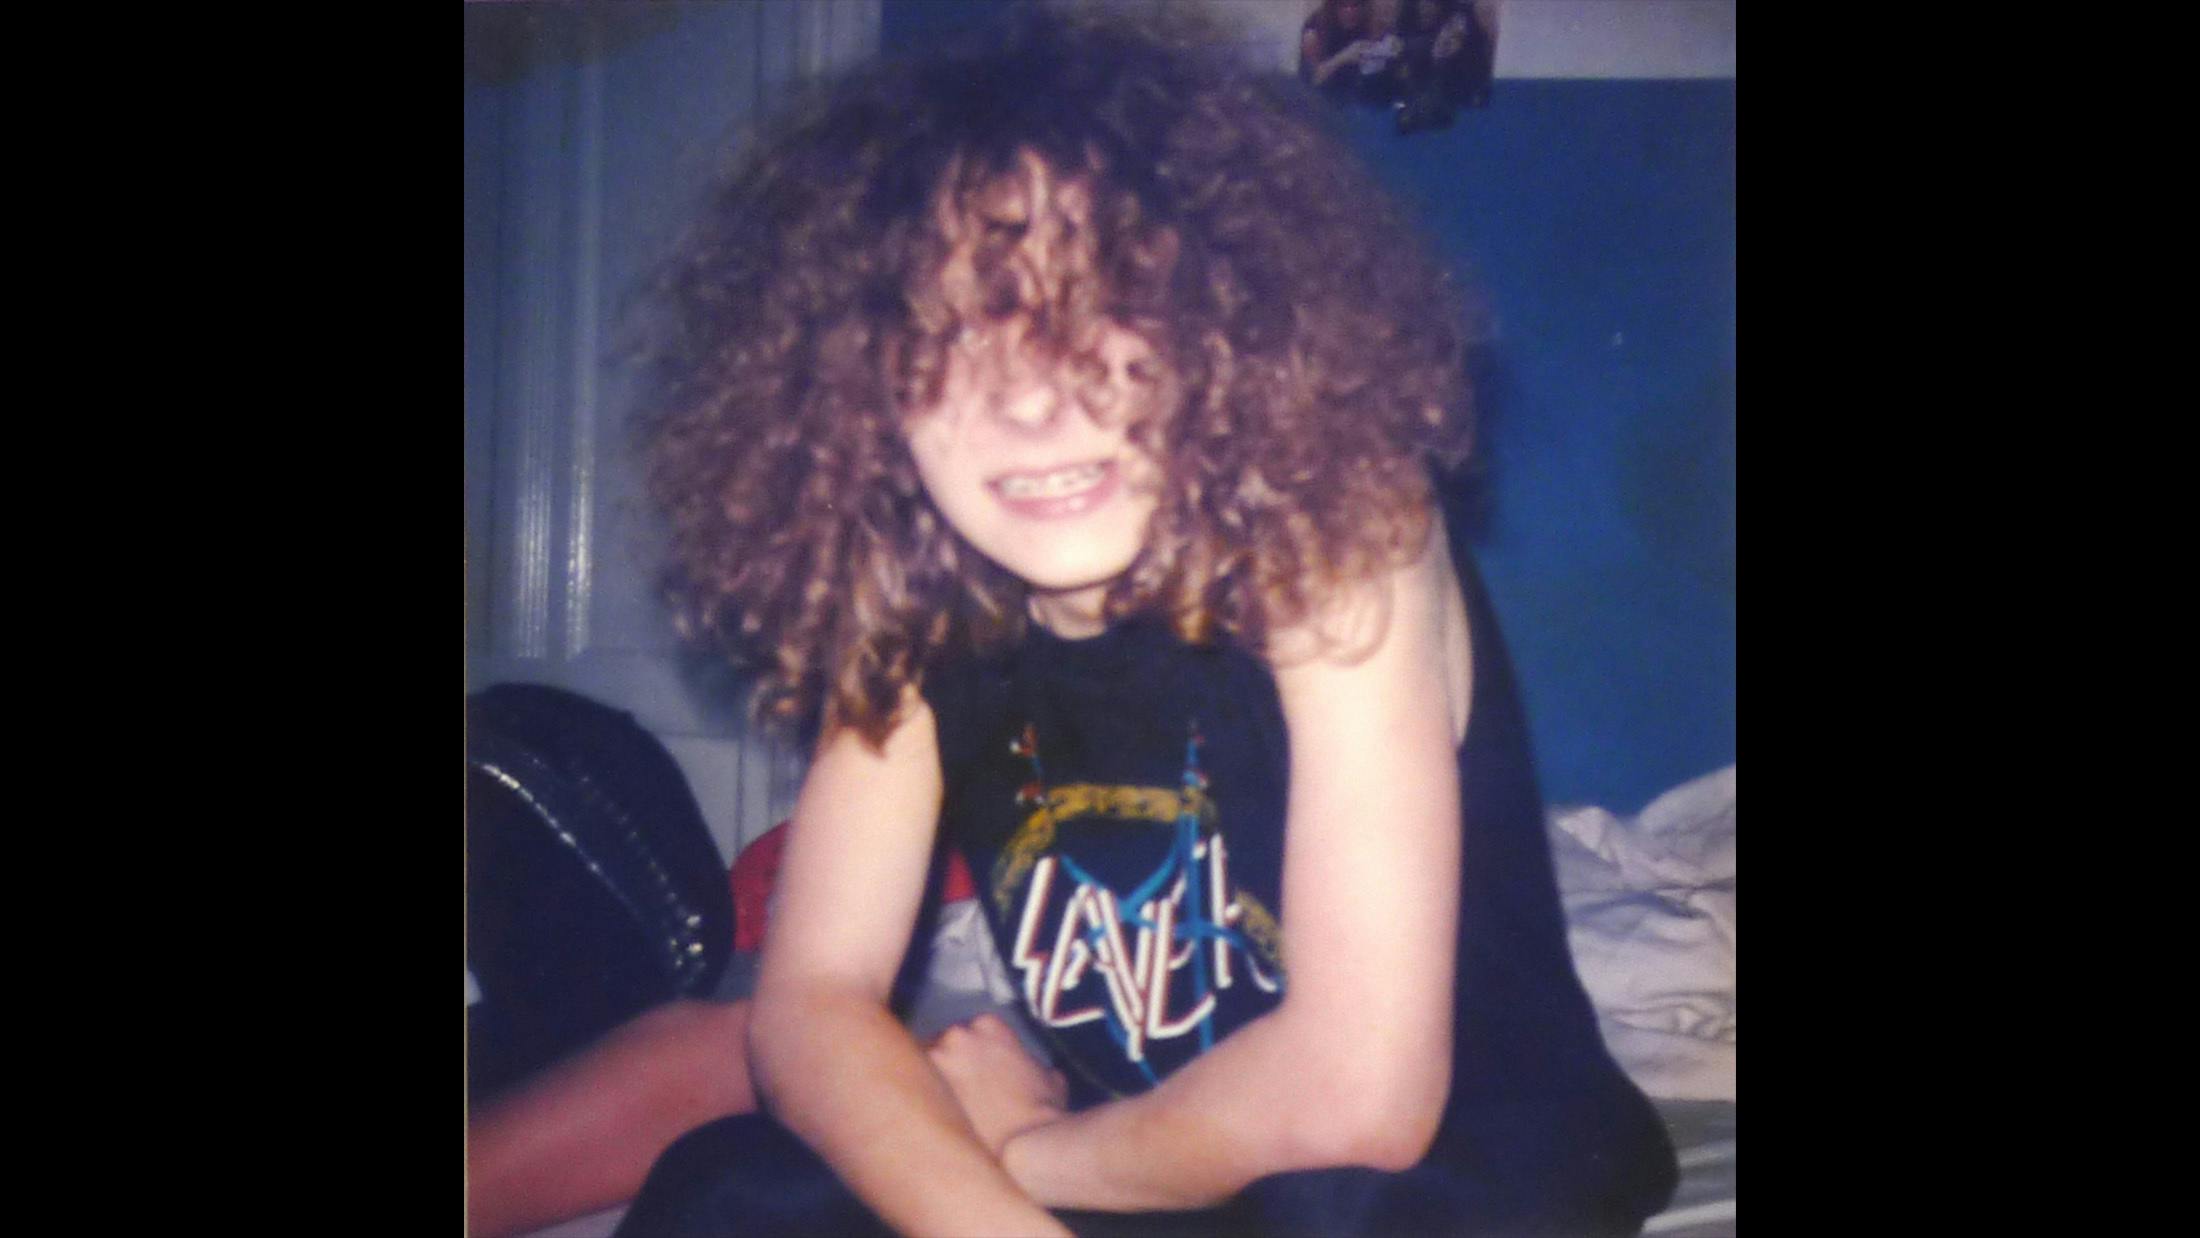 Mike back in 1985… pretty wasted on the Slayer tour.